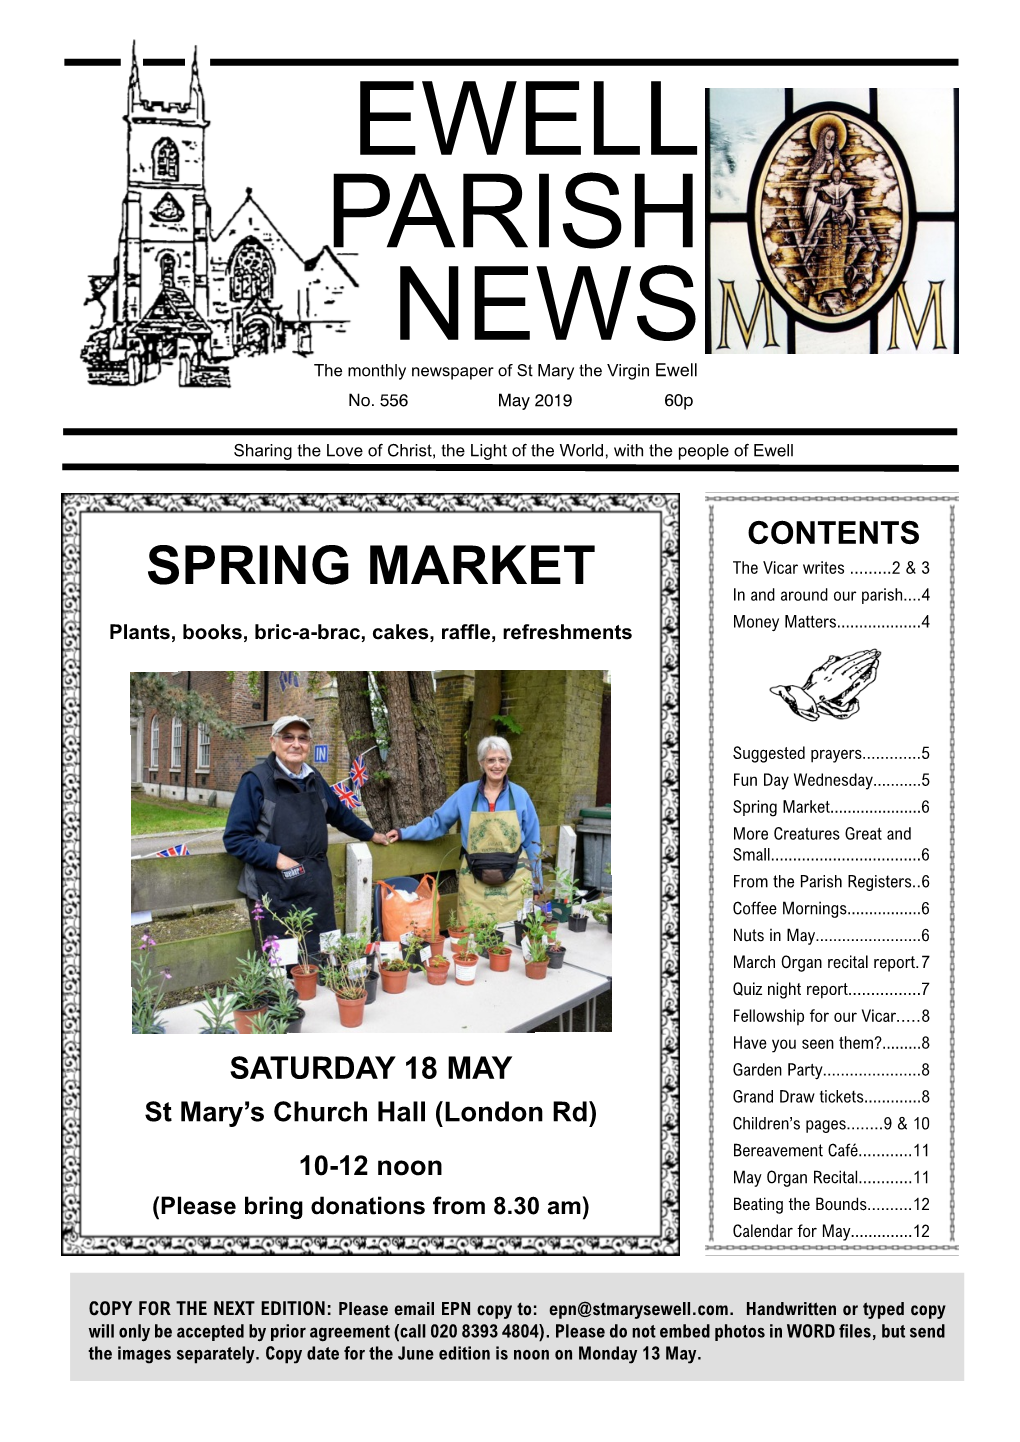 EWELL PARISH NEWS the Monthly Newspaper of St Mary the Virgin Ewell No